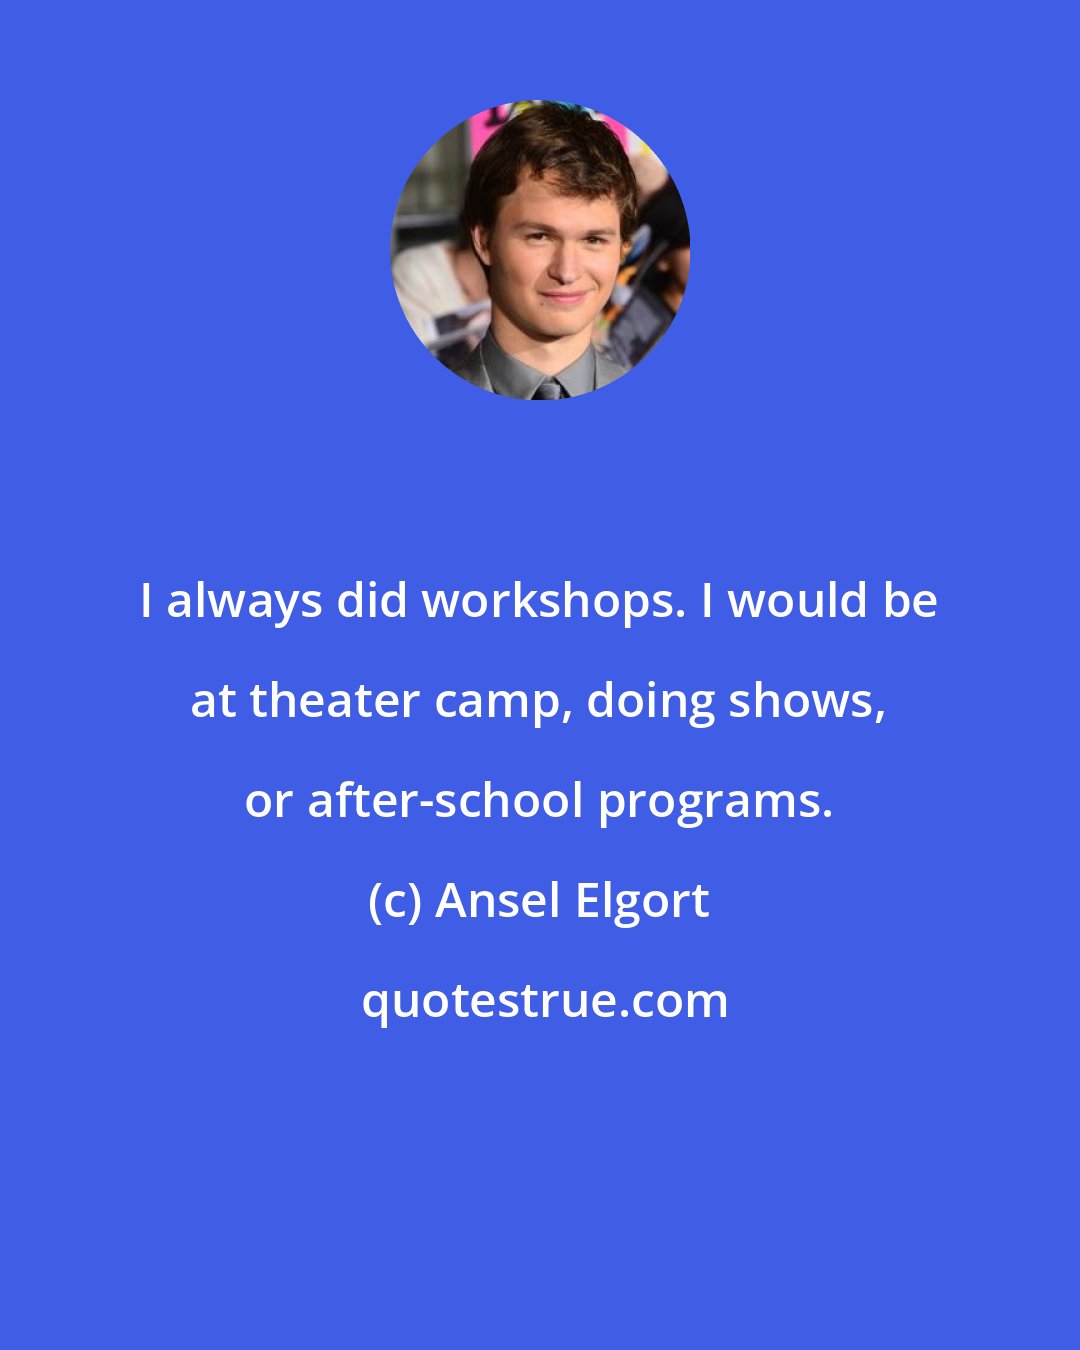 Ansel Elgort: I always did workshops. I would be at theater camp, doing shows, or after-school programs.